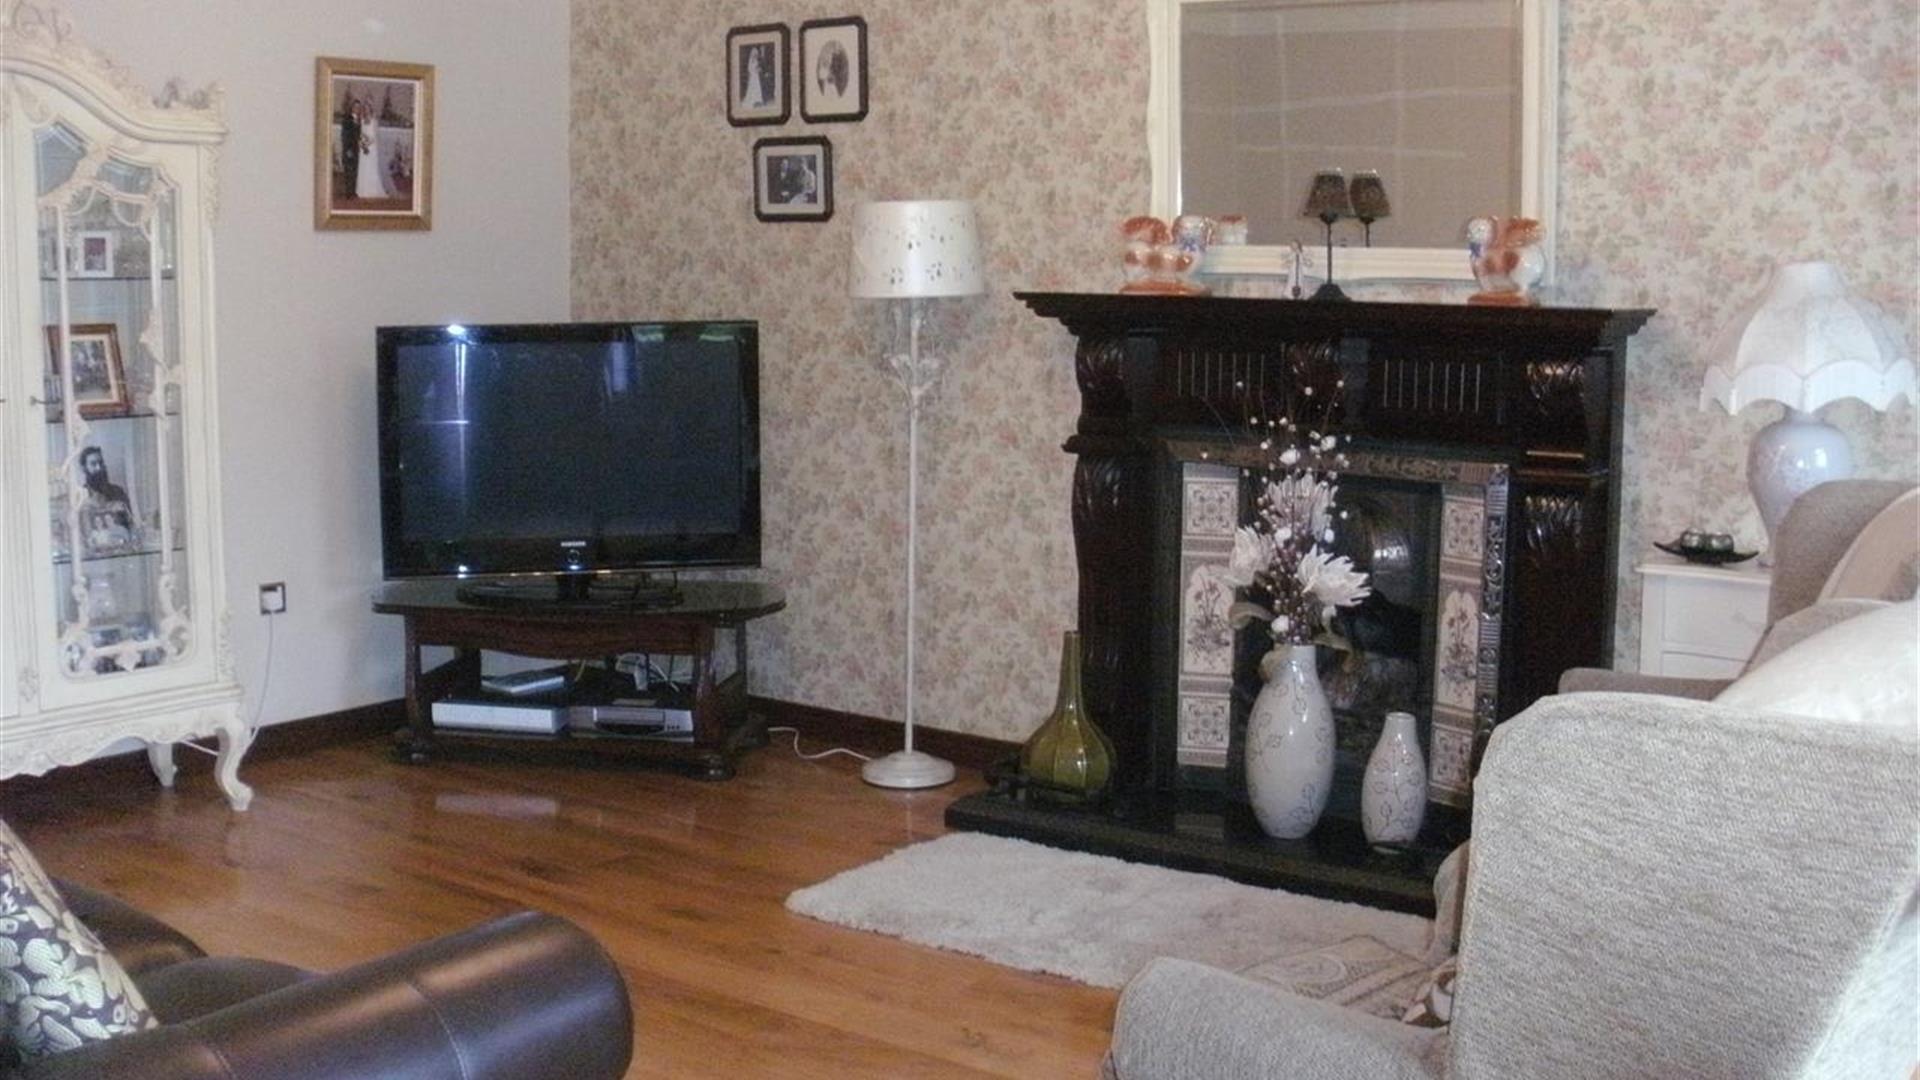 living area with TV, fireplace, sofa and armchairs